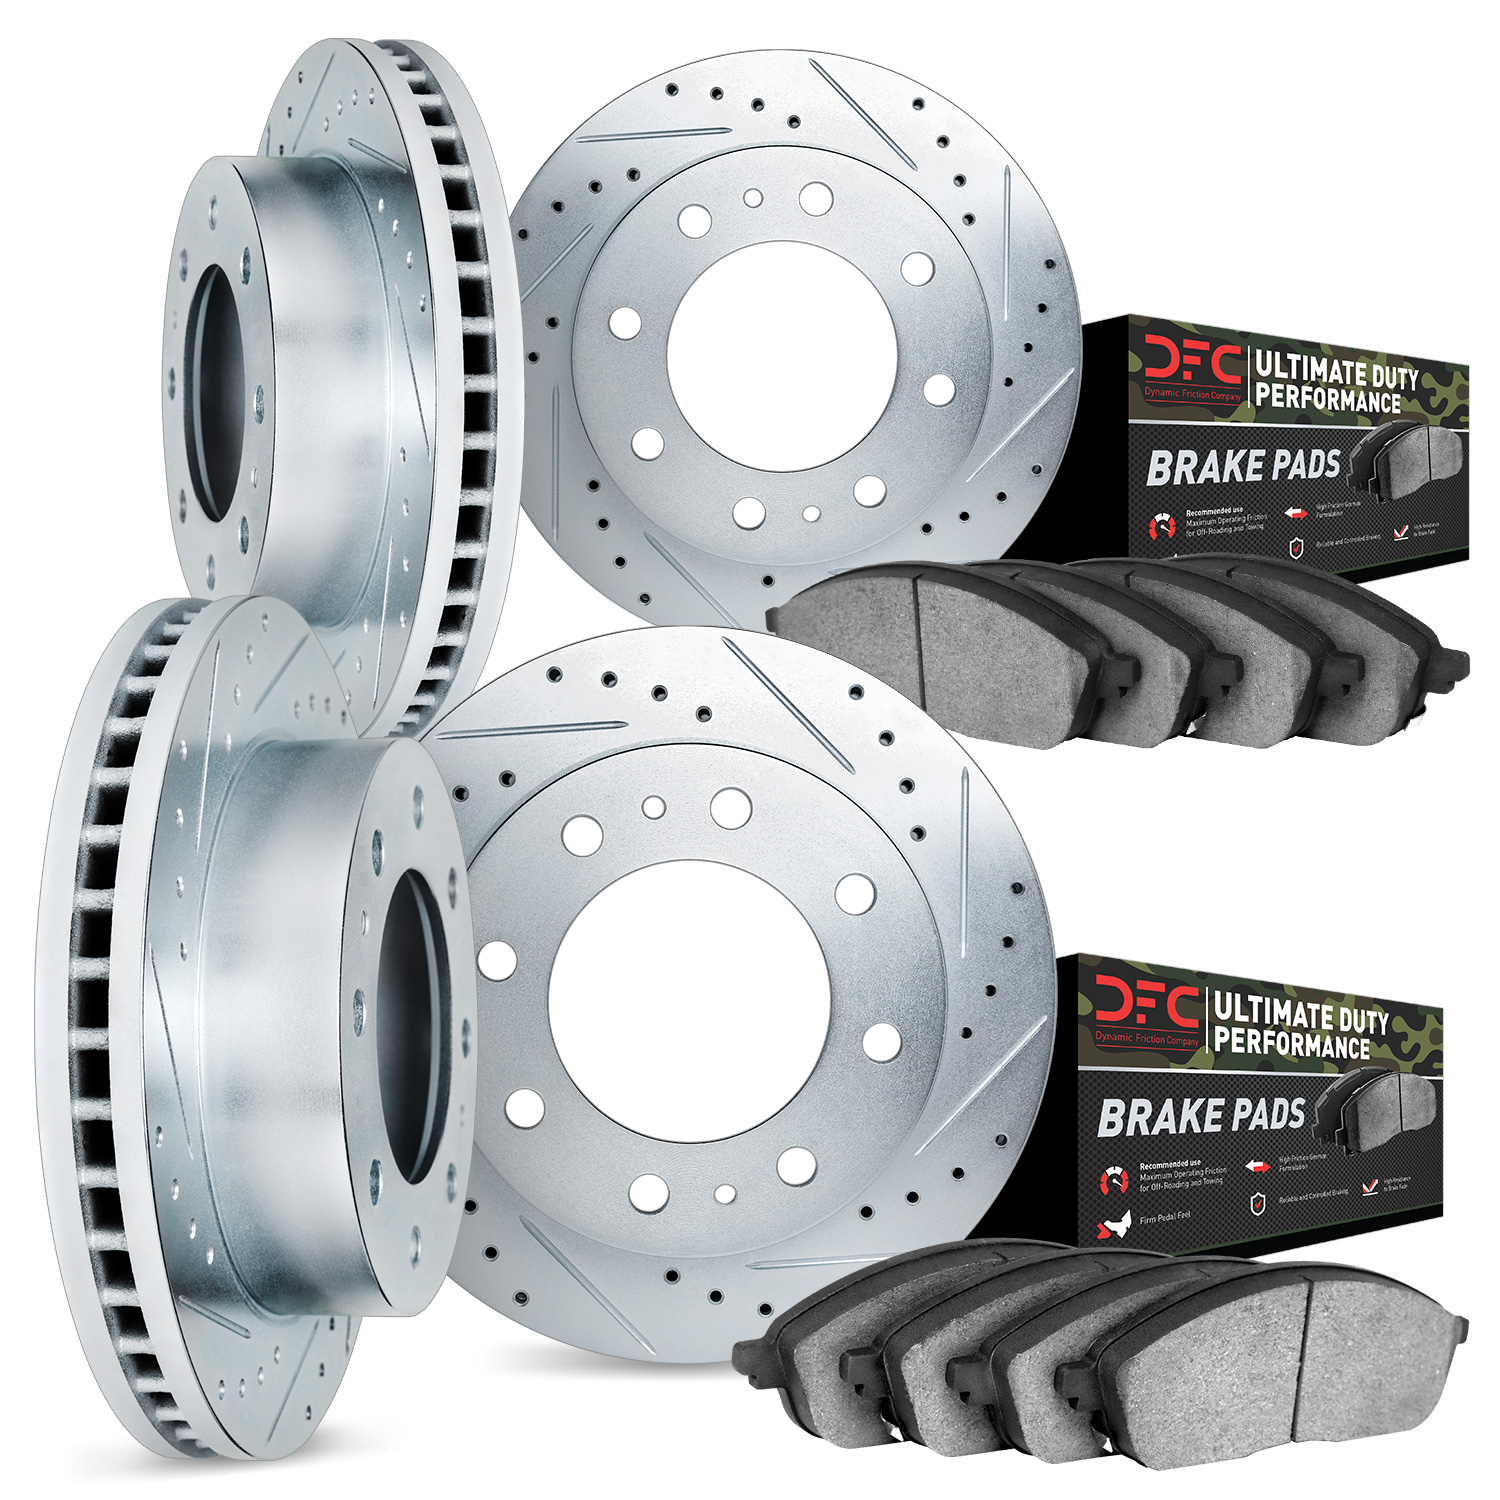 7404-54046 Drilled/Slotted Brake Rotors with Ultimate-Duty Brake Pads Kit [Silver], 2012-2012 Ford/Lincoln/Mercury/Mazda, Positi